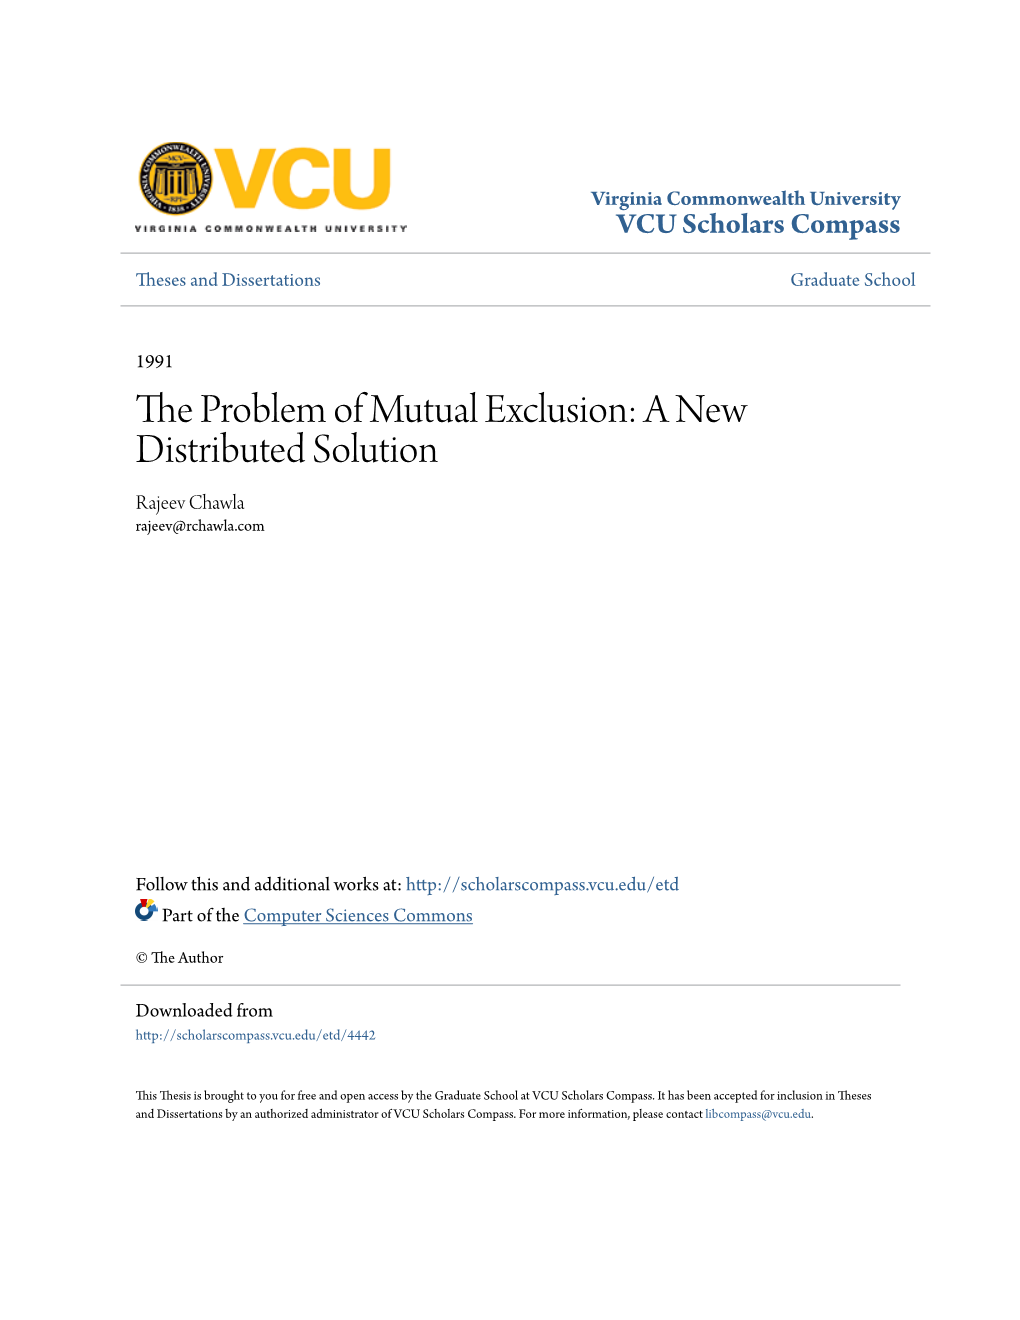 The Problem of Mutual Exclusion: a New Distributed Solution